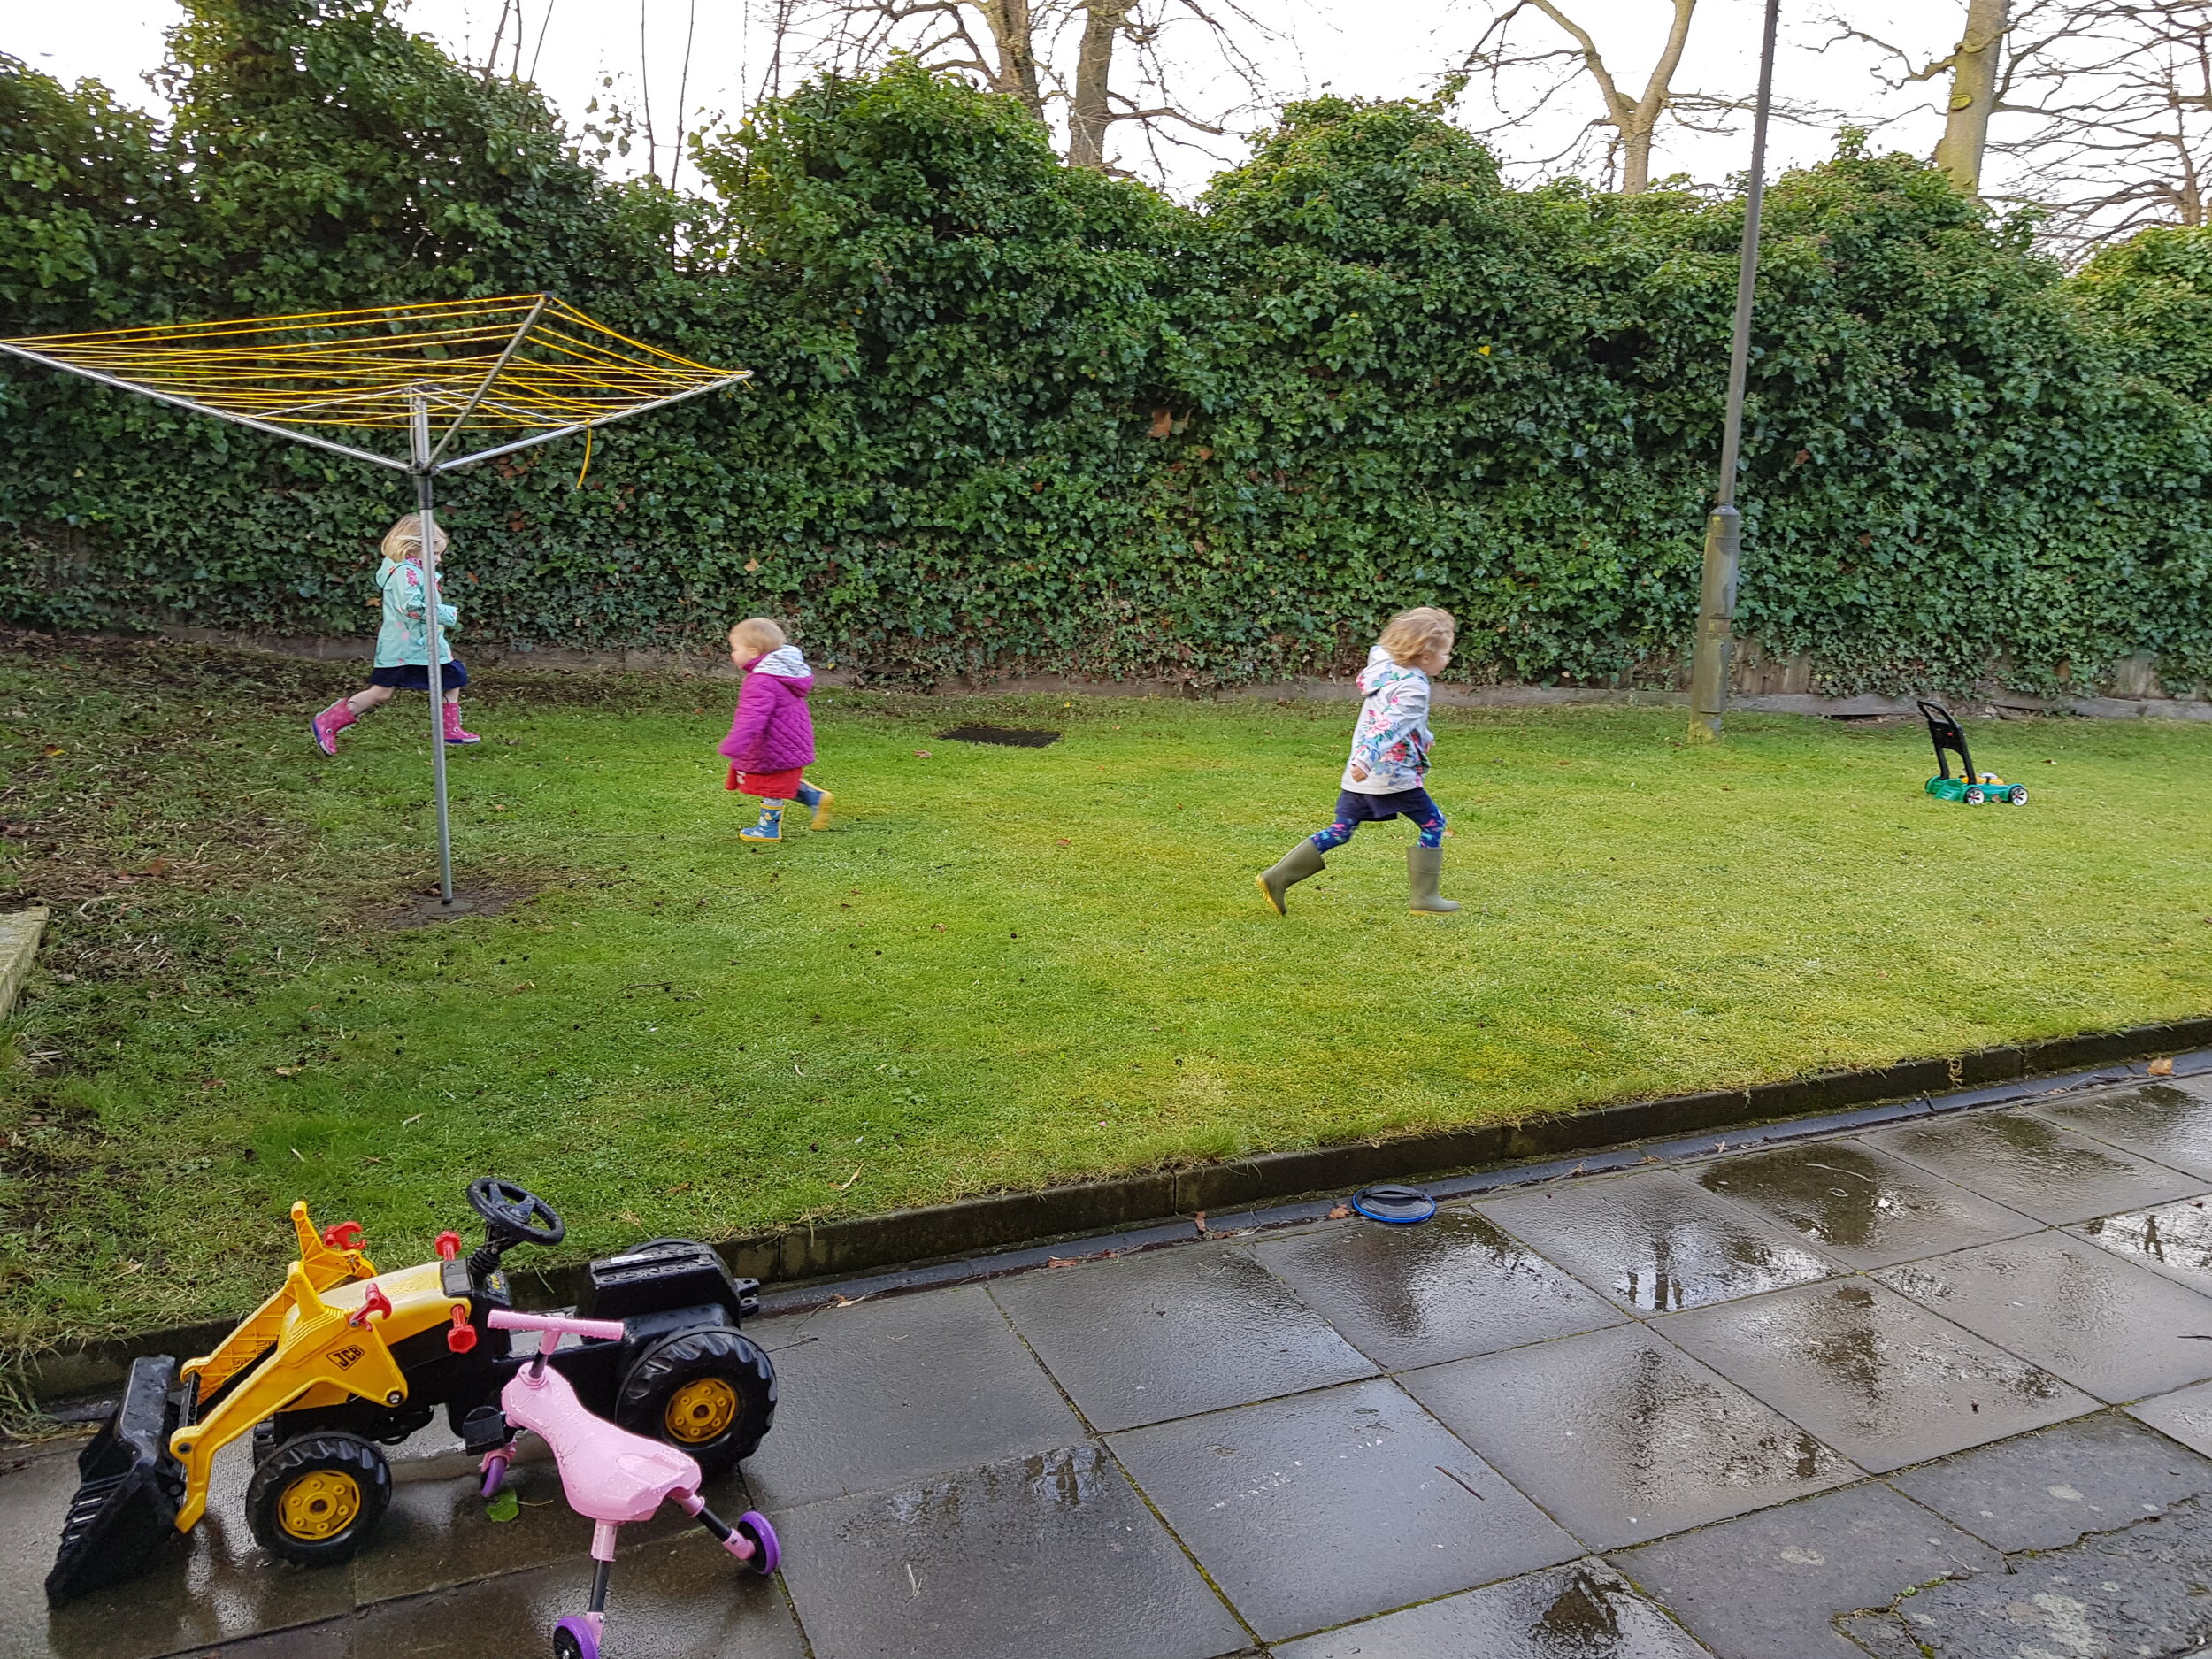 Tommy and her family doing their laps in the garden